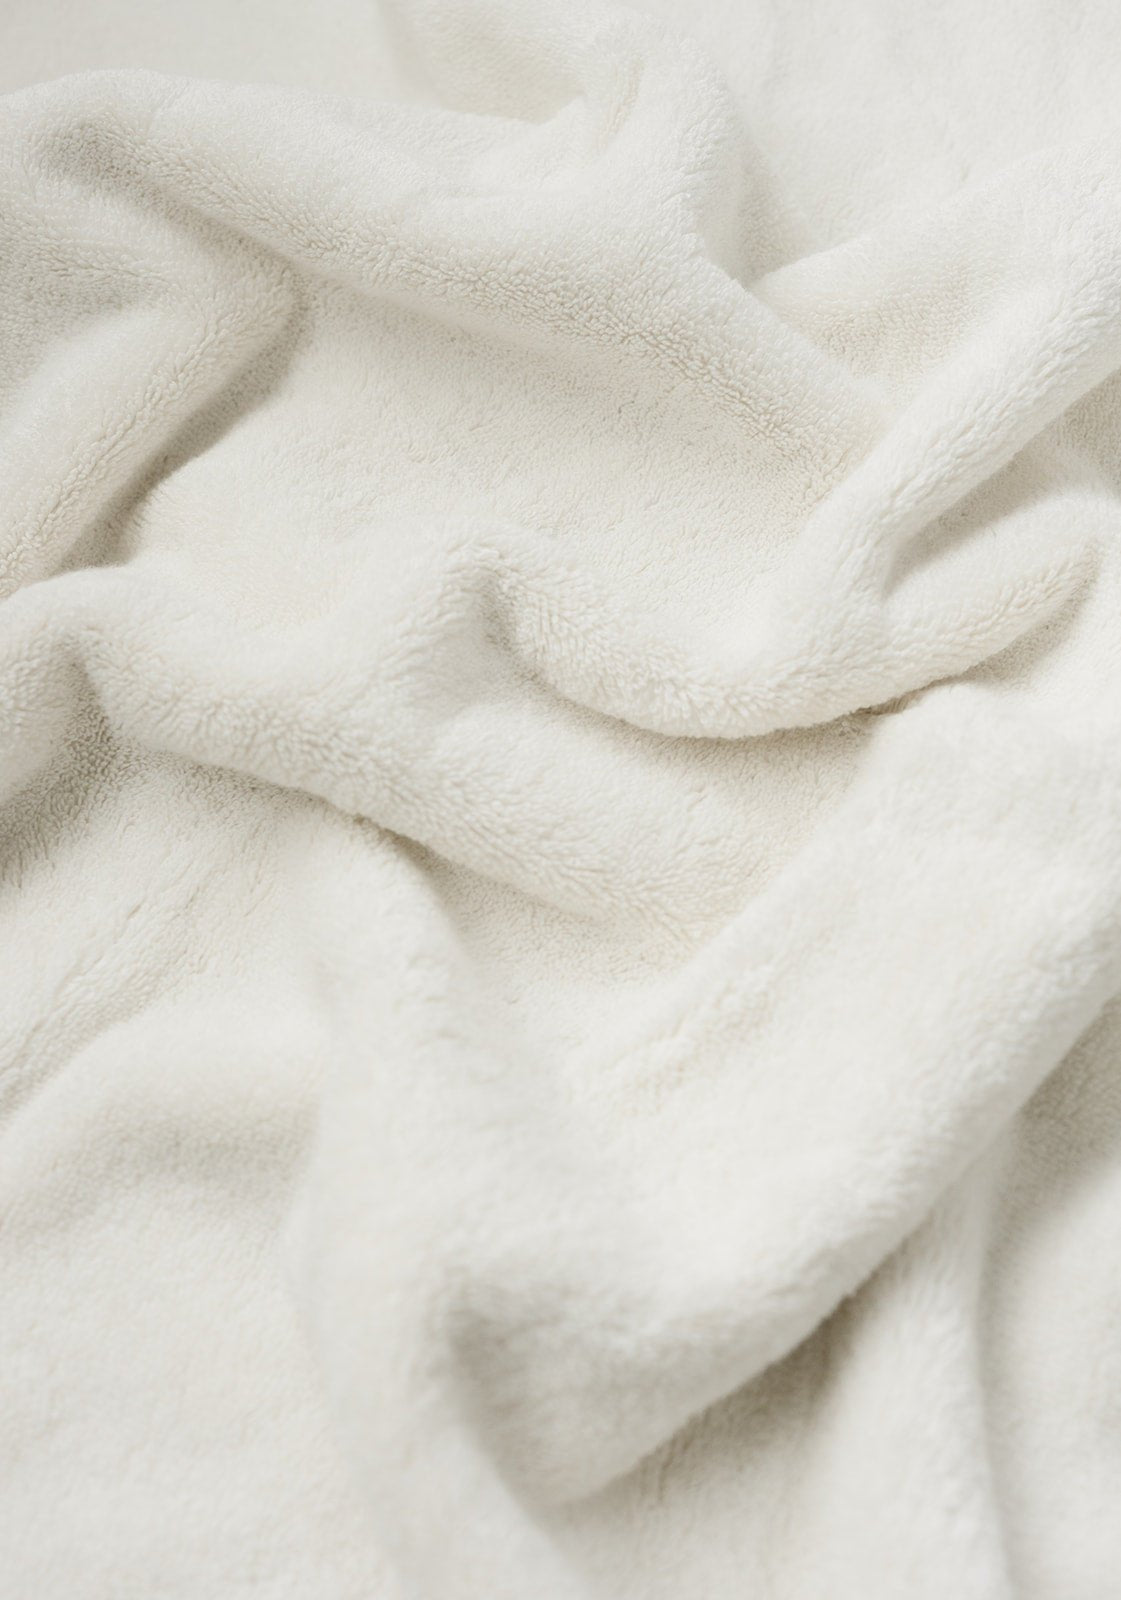 Premium Plush Bath Towel in the color Sea Shell. Photo of Sea Shell Premium Plush Bath Towel taken as a close up only showing the Premium Plush Bath Towel |Color:Sea Shell